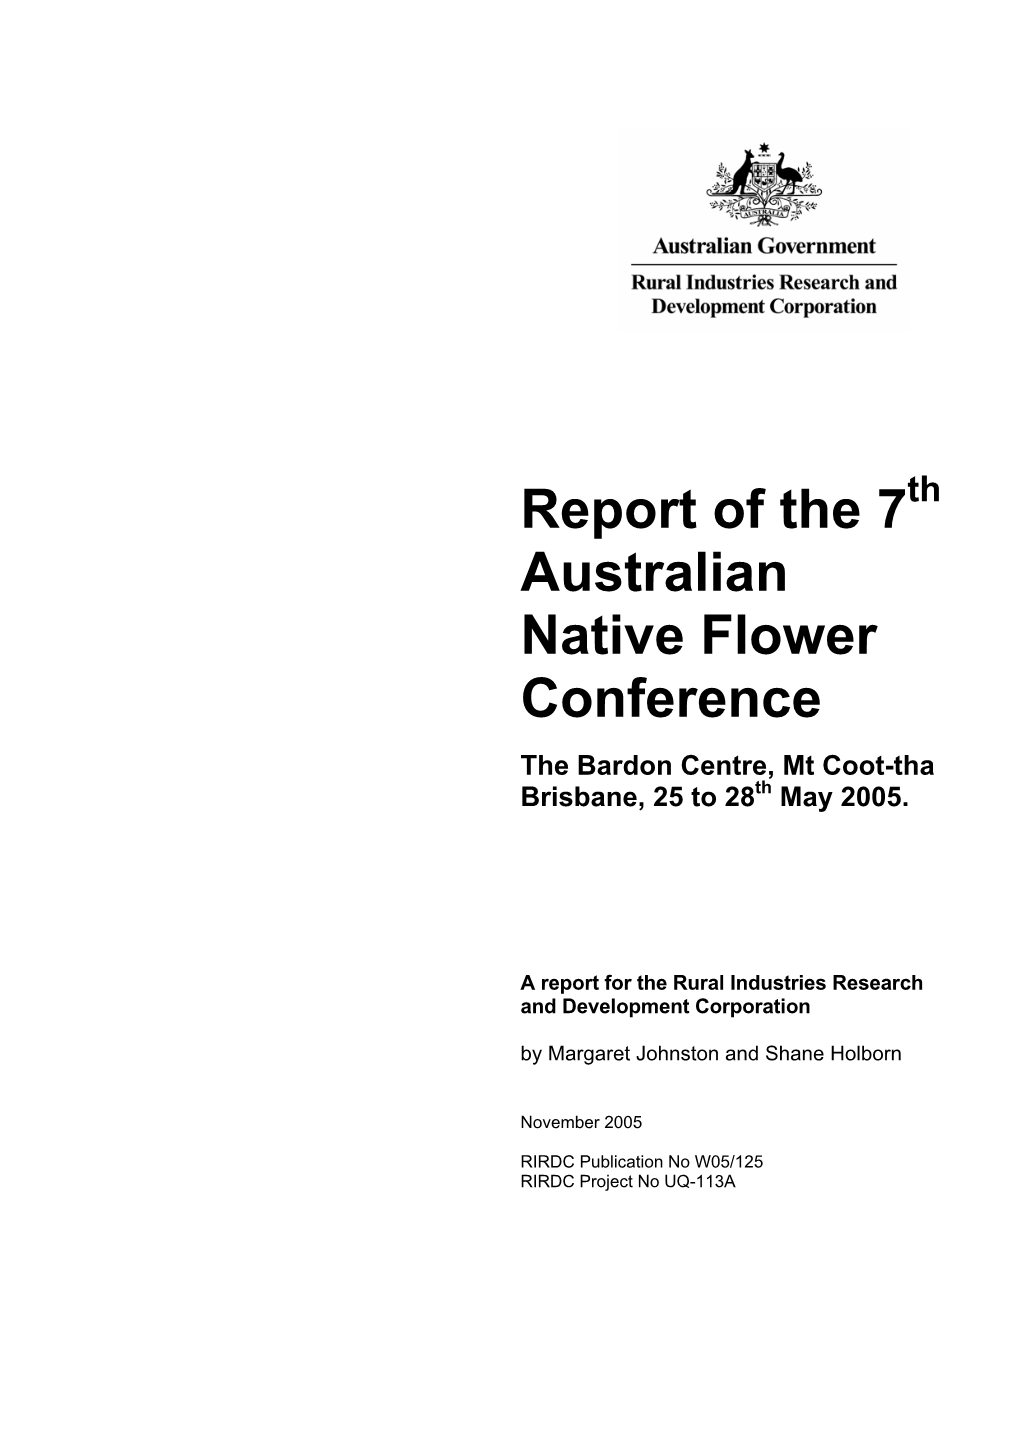 Report of the 7 Australian Native Flower Conference